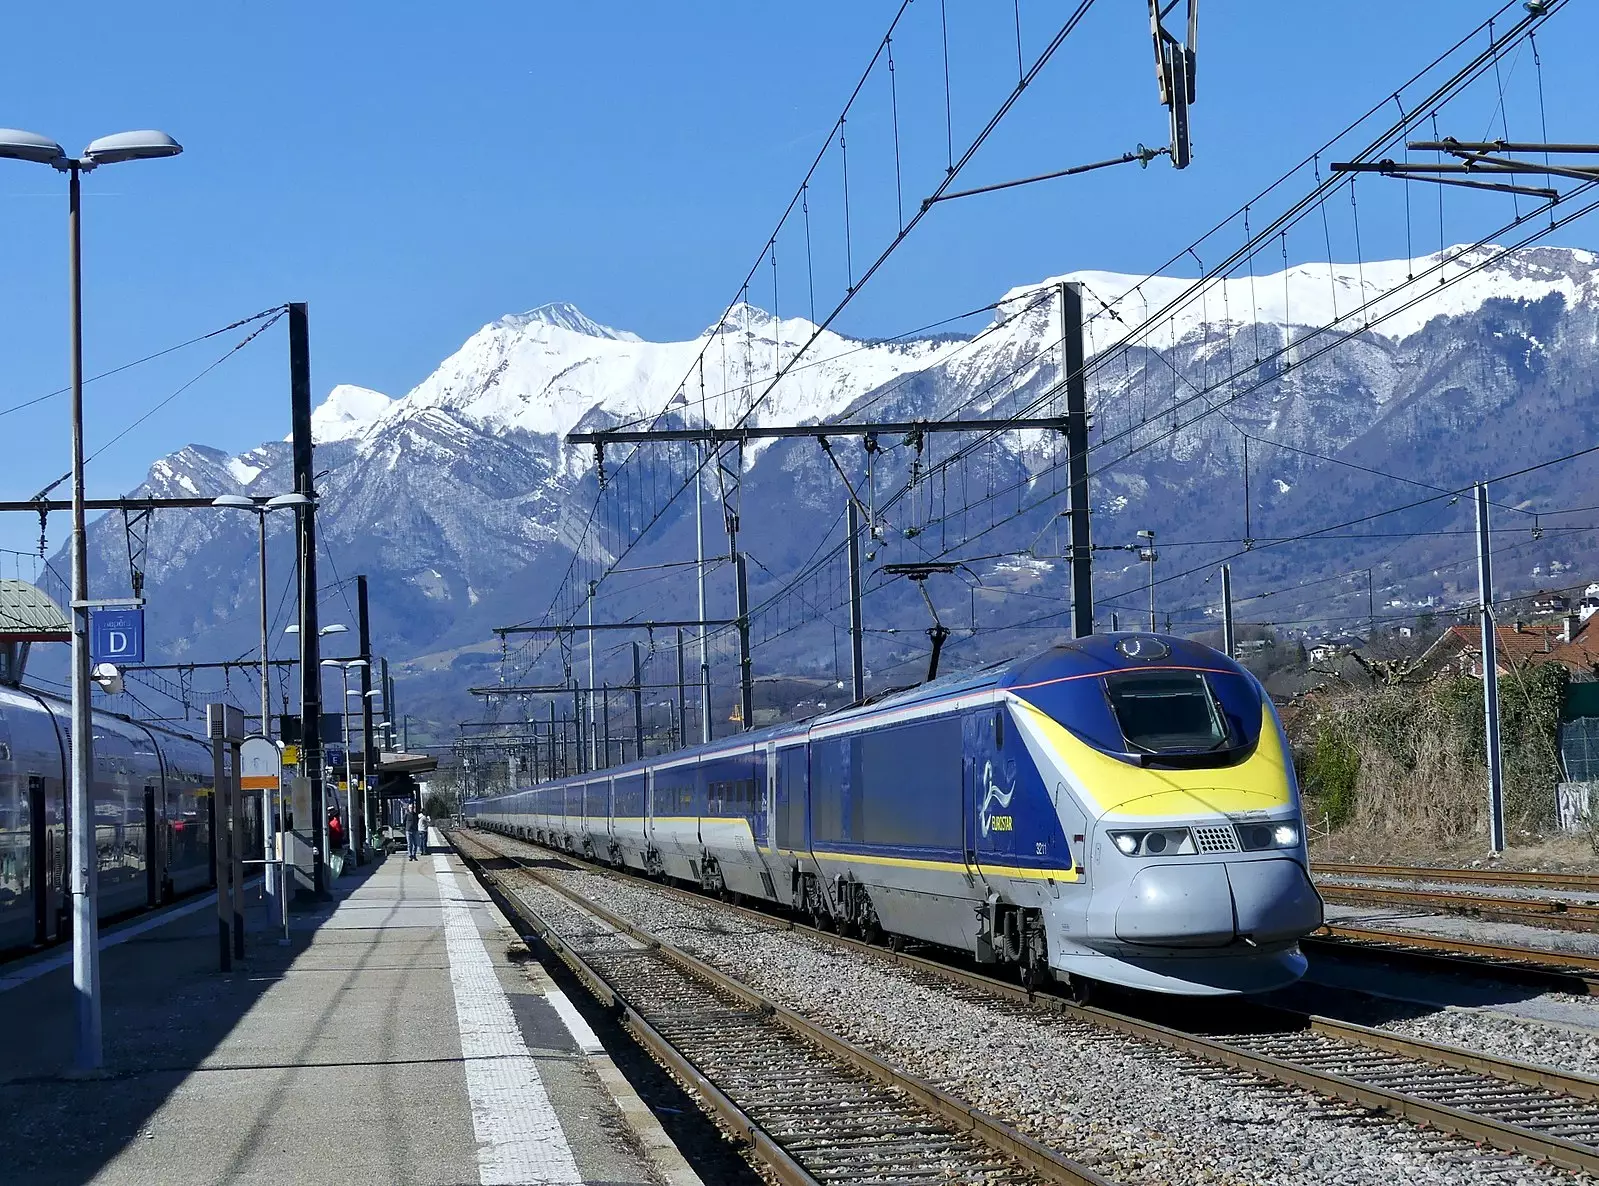 Eurostar train journeys are in the sale starting at £29 each way. (Florian Pépellin/Wikipedia)